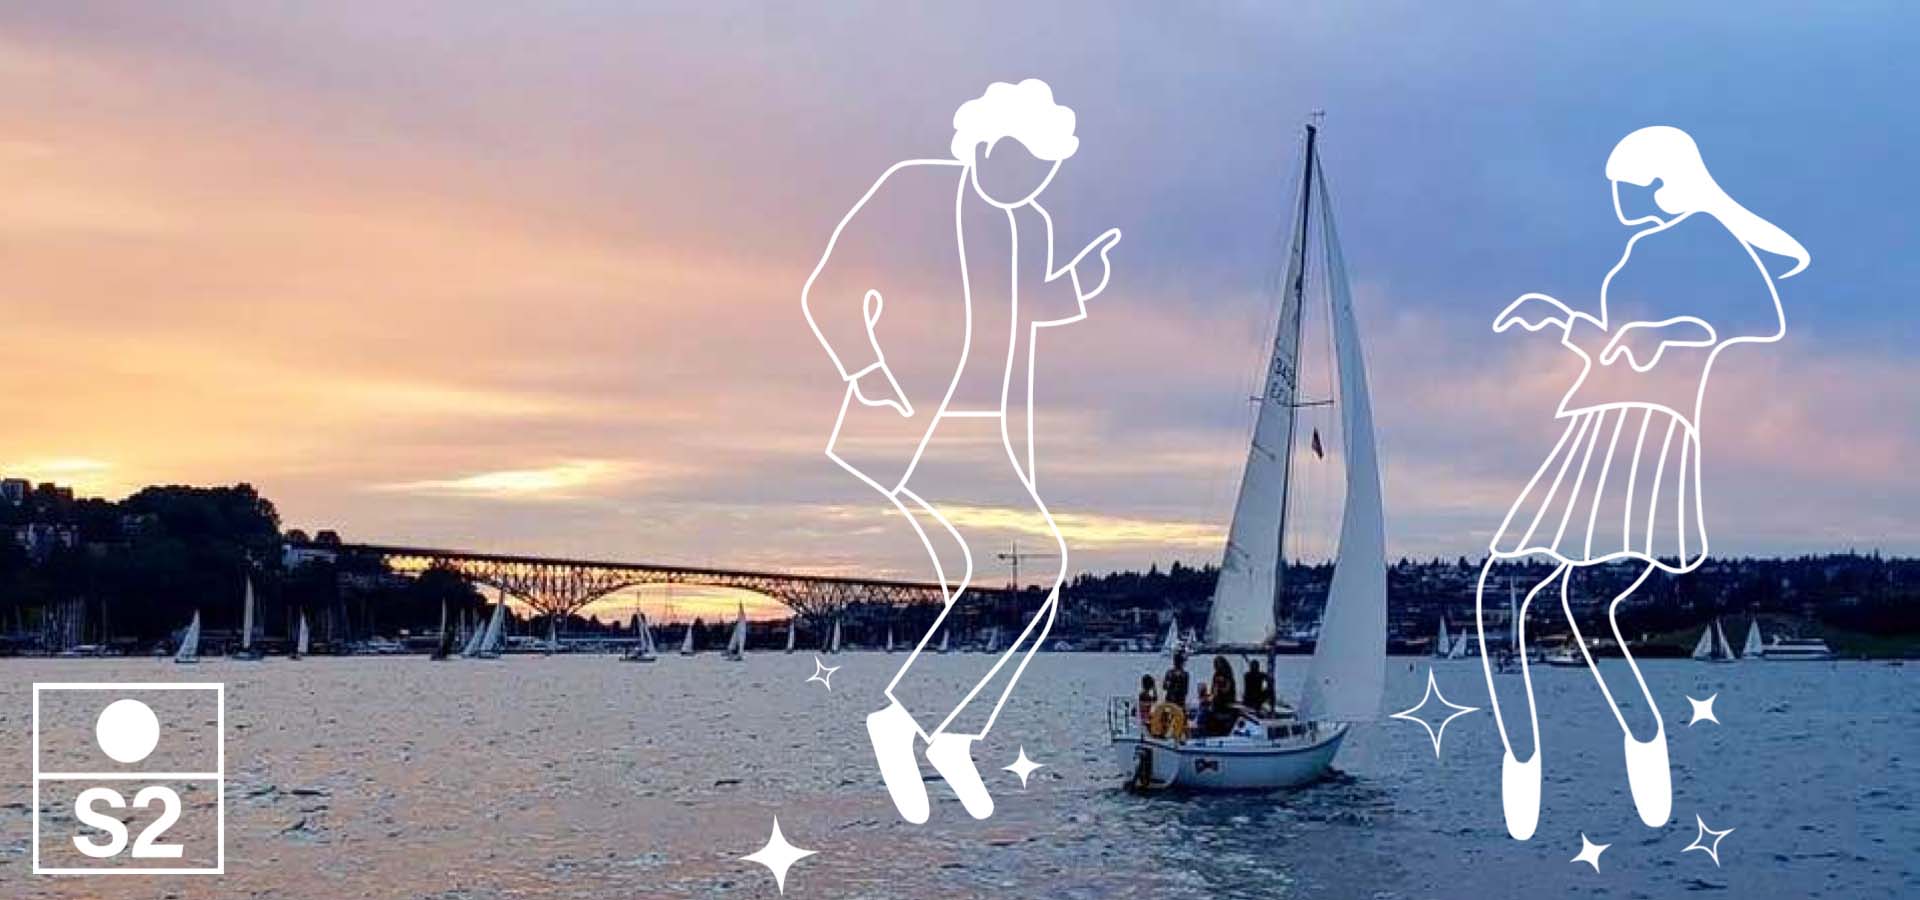 Sunset view of South Lake Union with sailboats; also overlapped with drawing images of people dancing on the water